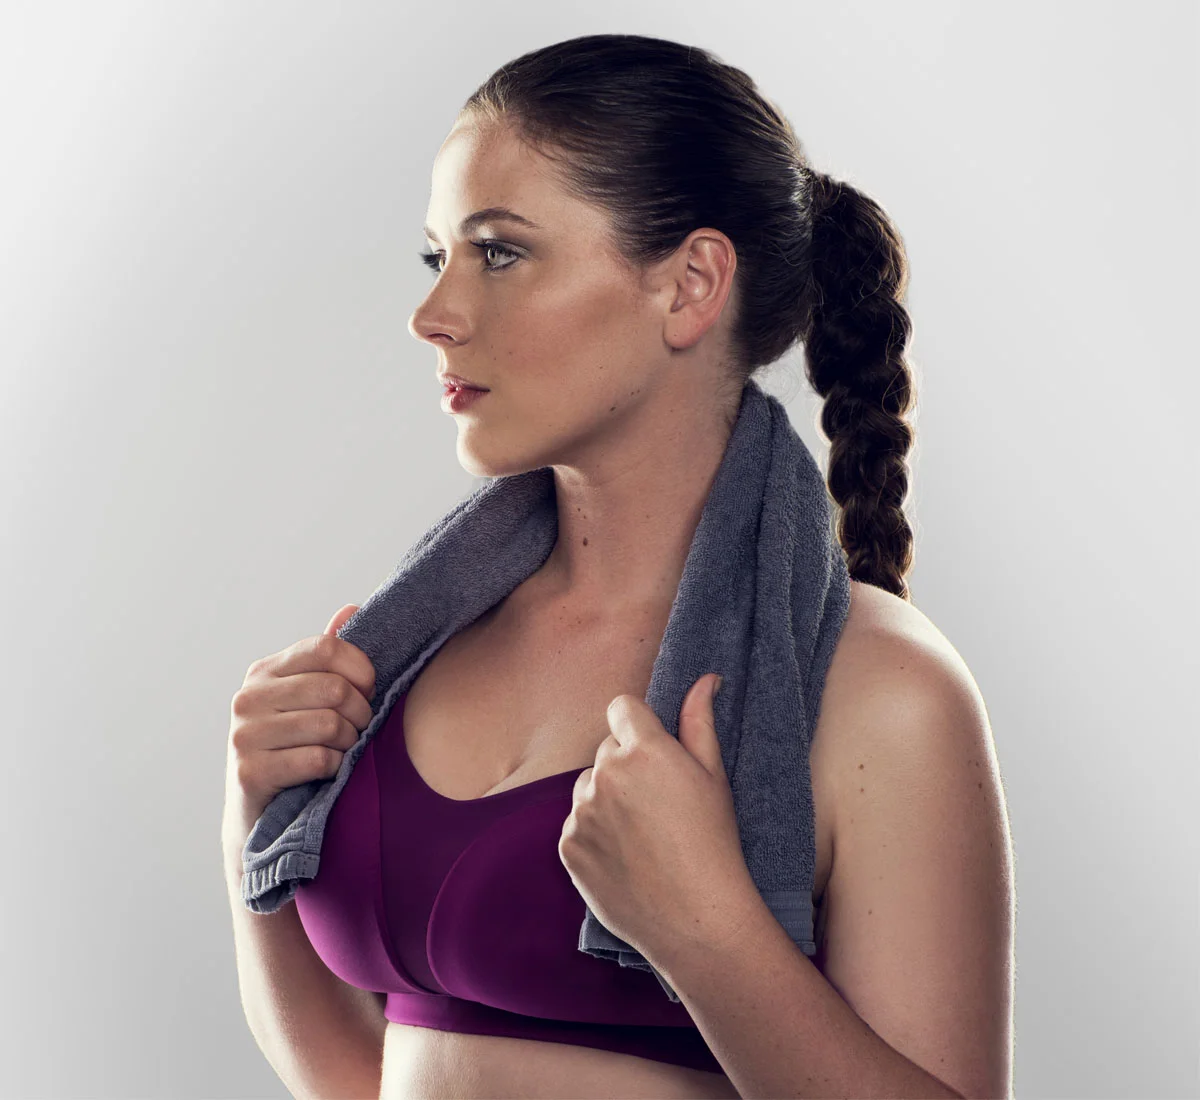 Fabulous, Comfortable Sports Bras Really Do Exist! Here's How to Find One.  - Granite Bay Cosmetic Surgery